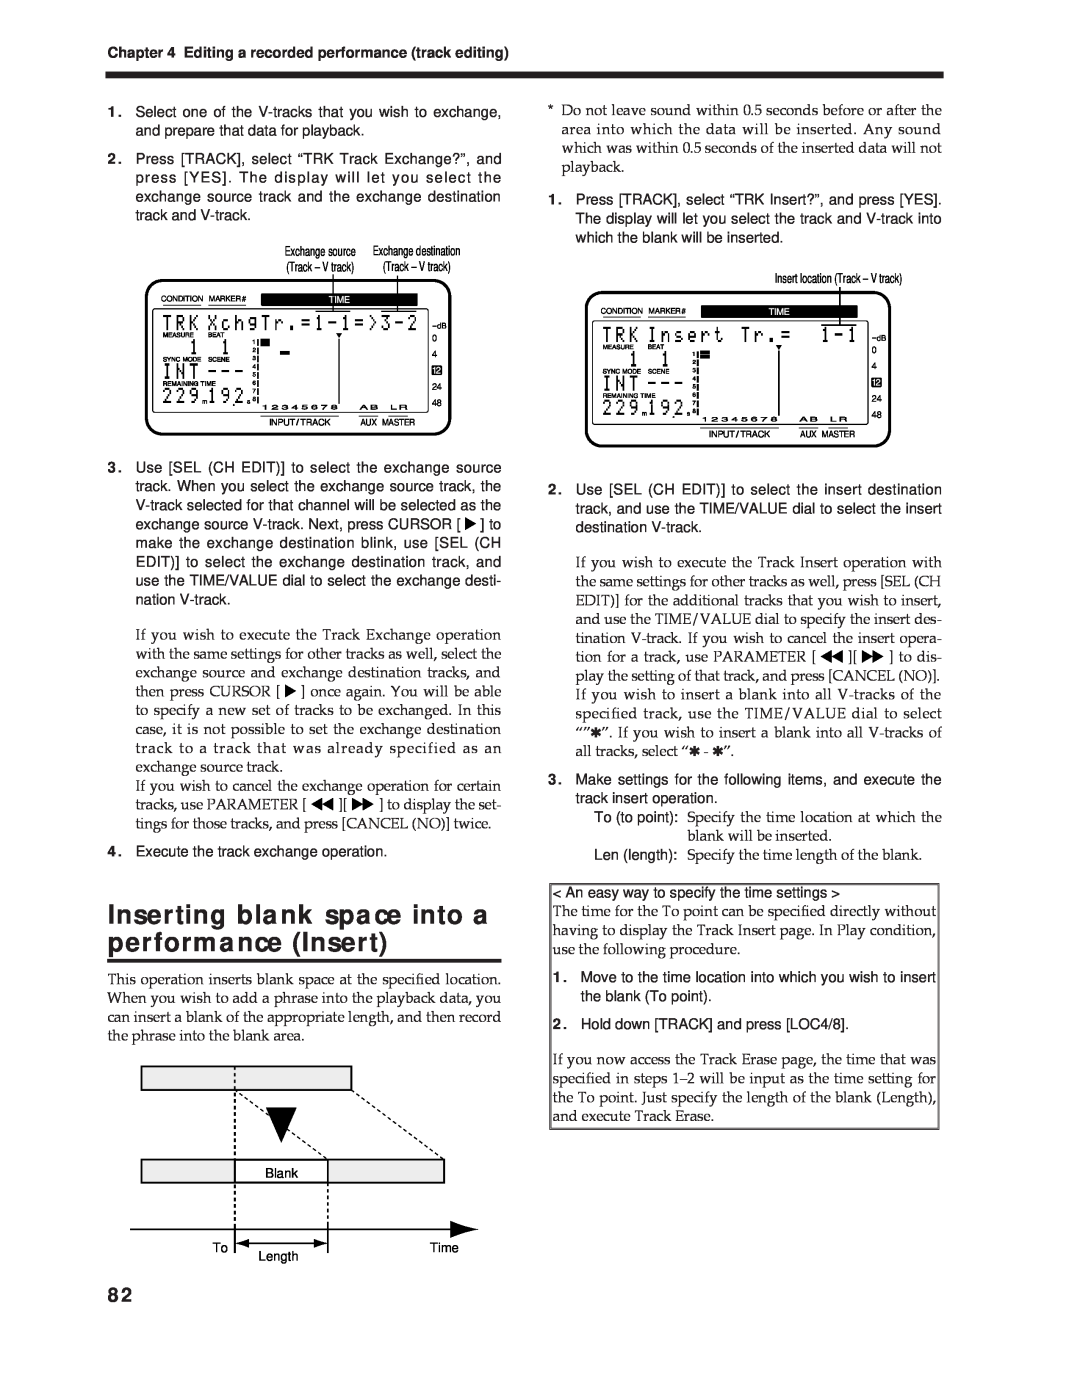 Roland Vs-880 important safety instructions Inserting blank space into a performance Insert 